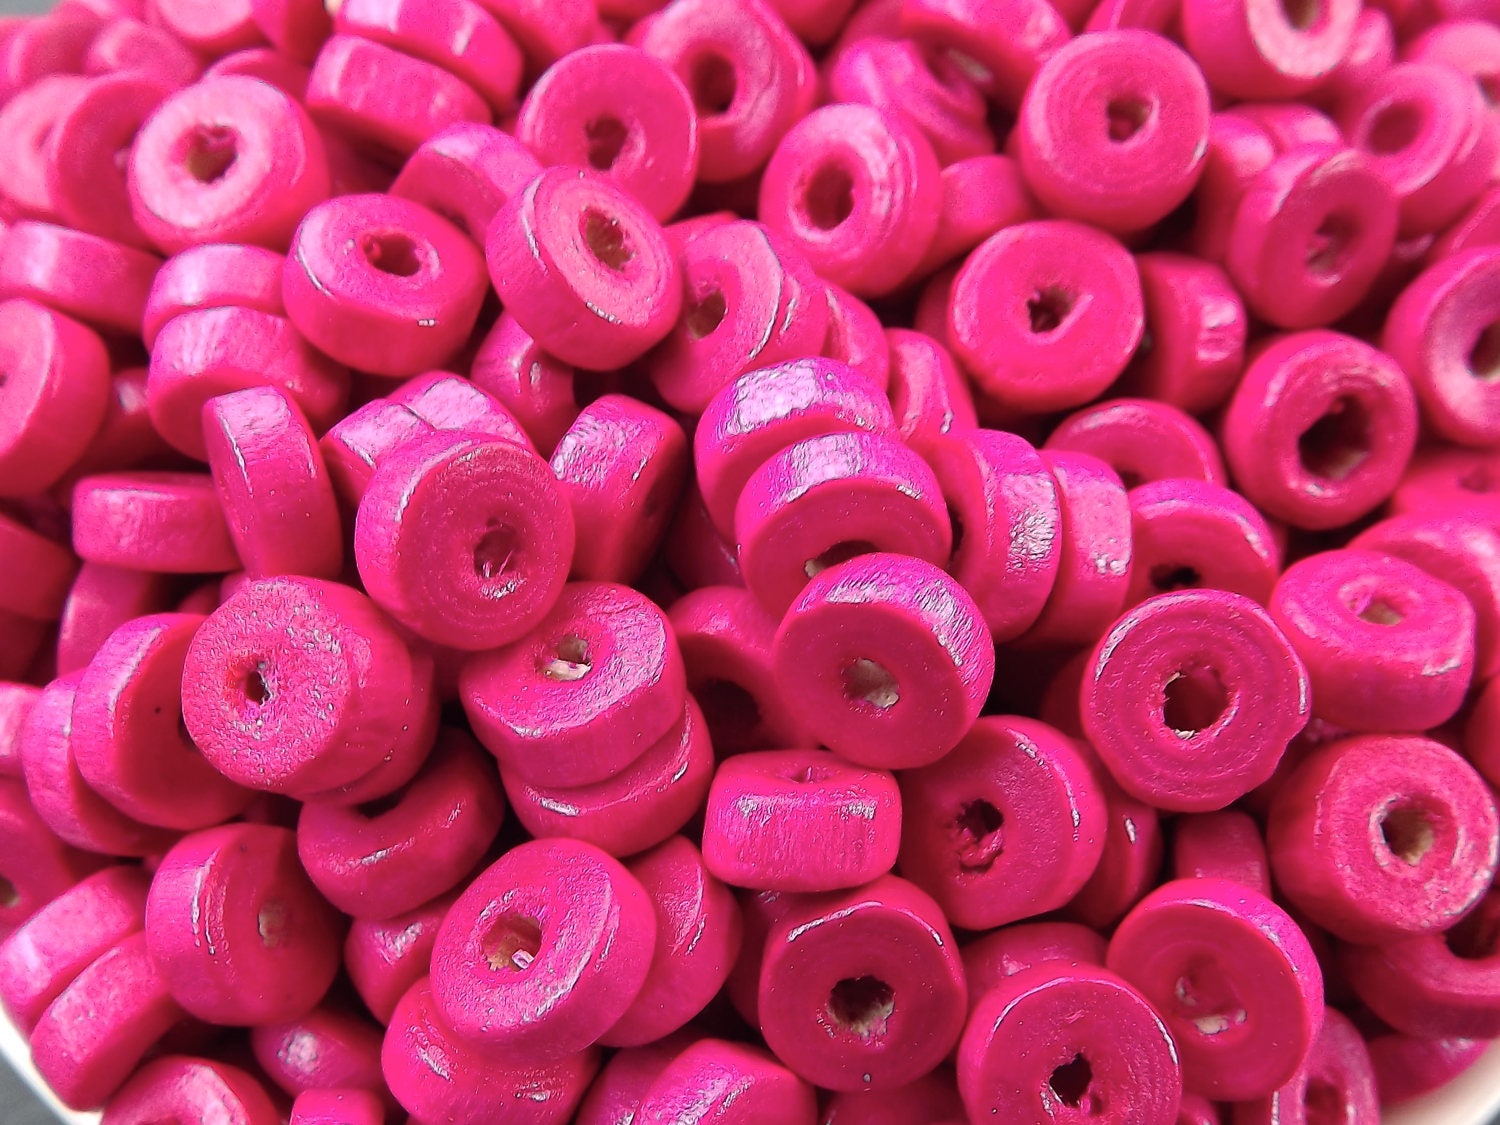 Hot Pink Round Rondelle Heishi Wood Beads Satin Varnished Plain Simple Round Smooth Ball Bead Spacers 8mm Choose 50pcs, 200pcs or 400pcs